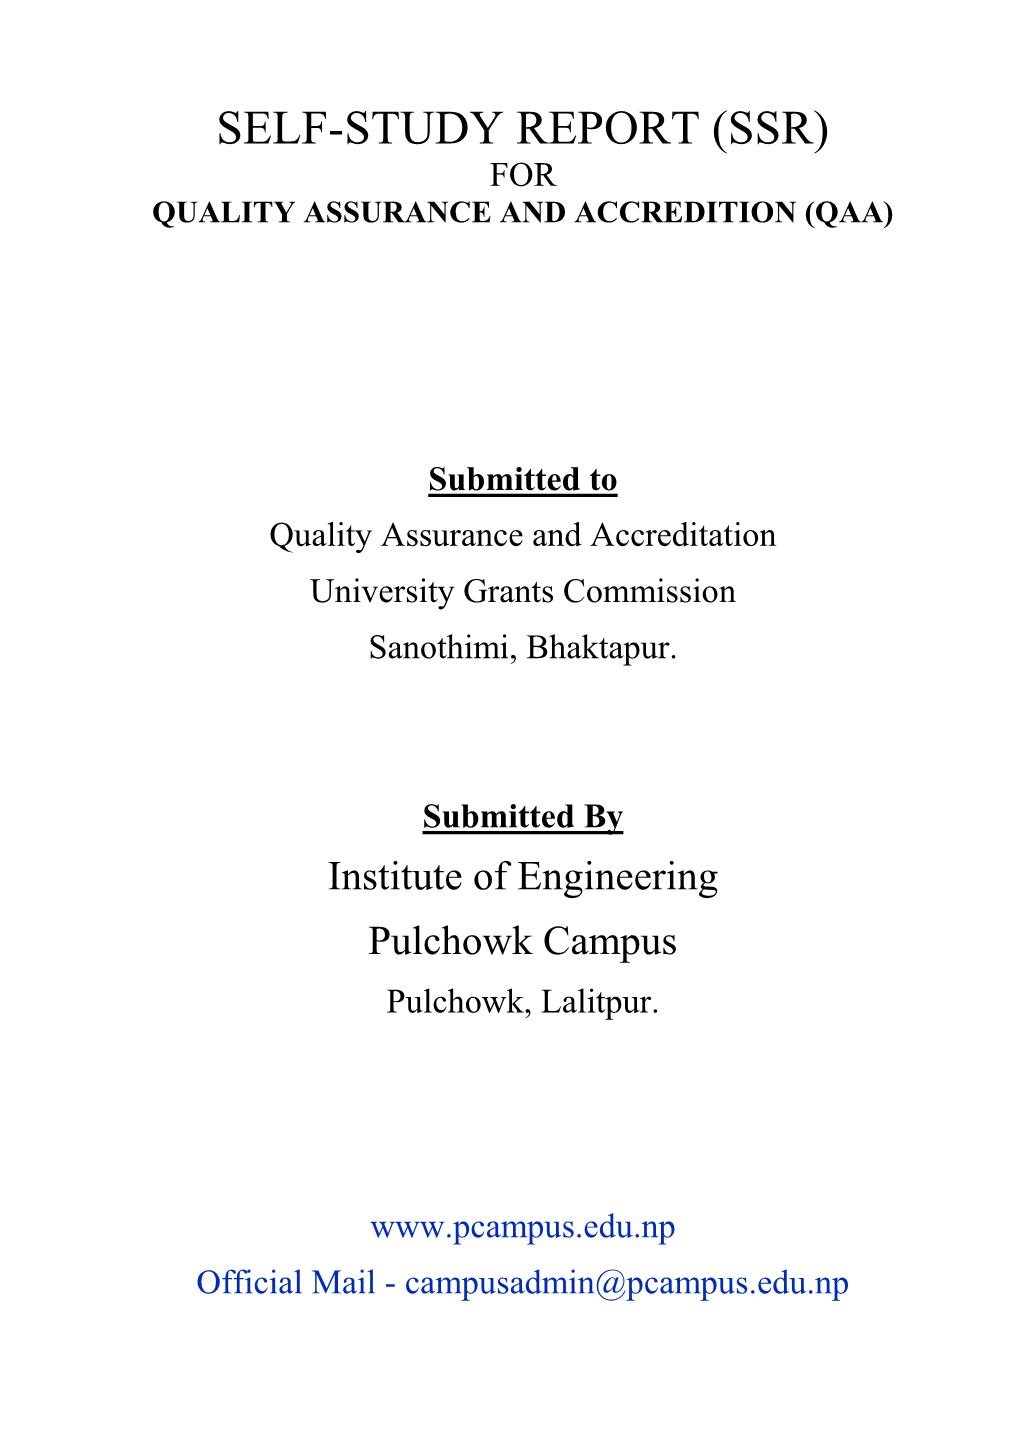 Self-Study Report (Ssr) for Quality Assurance and Accredition (Qaa)